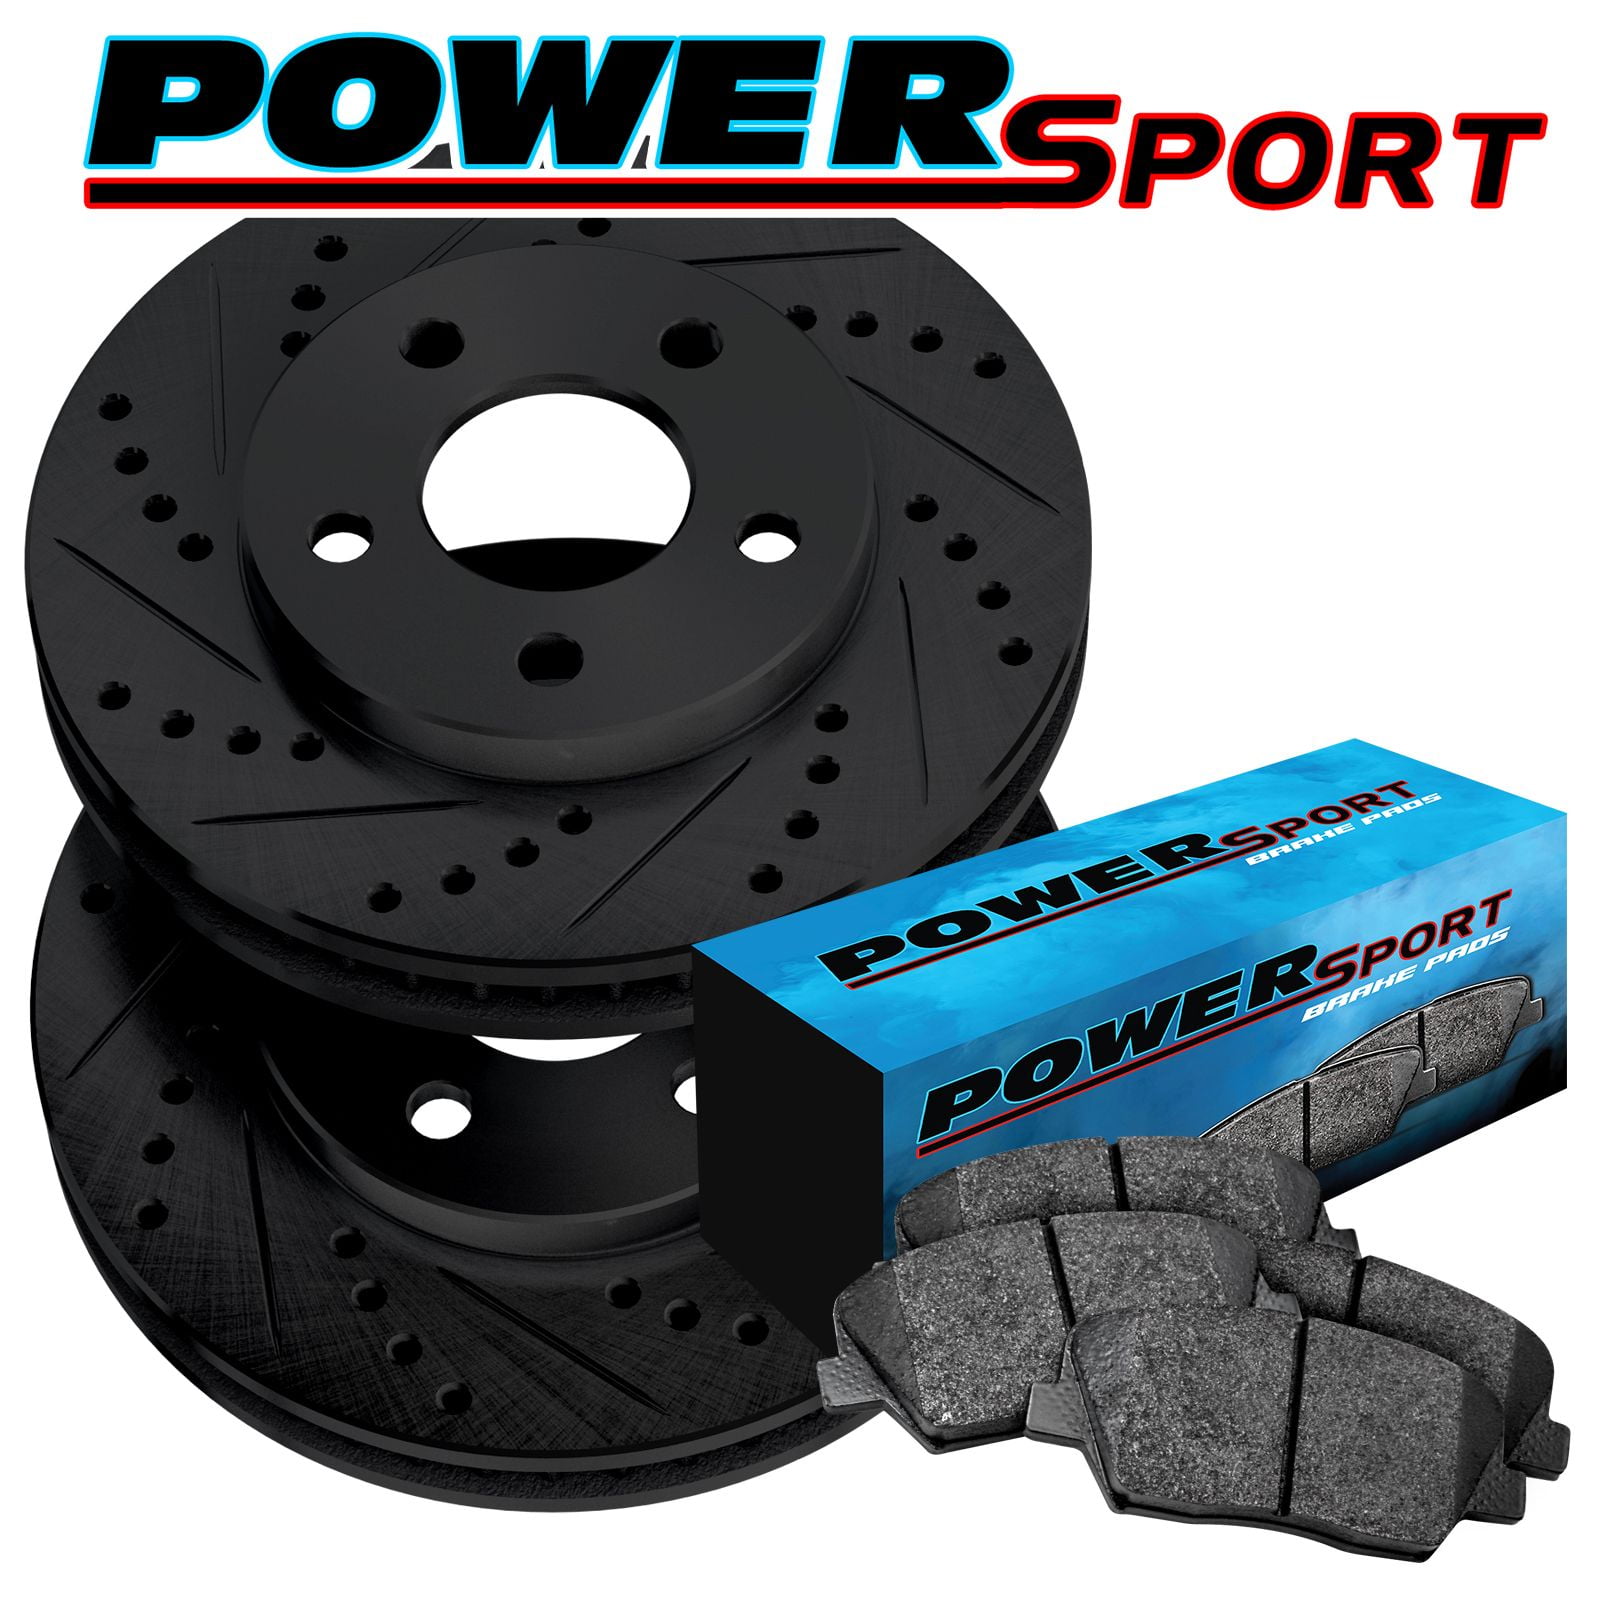 PowerSport Front Brakes and Rotors Kit |Front Brake Pads| Brake Rotors and  Pads| Ceramic Brake Pads and Rotors |fits 2012-2021 Audi A3 Quattro, S3;